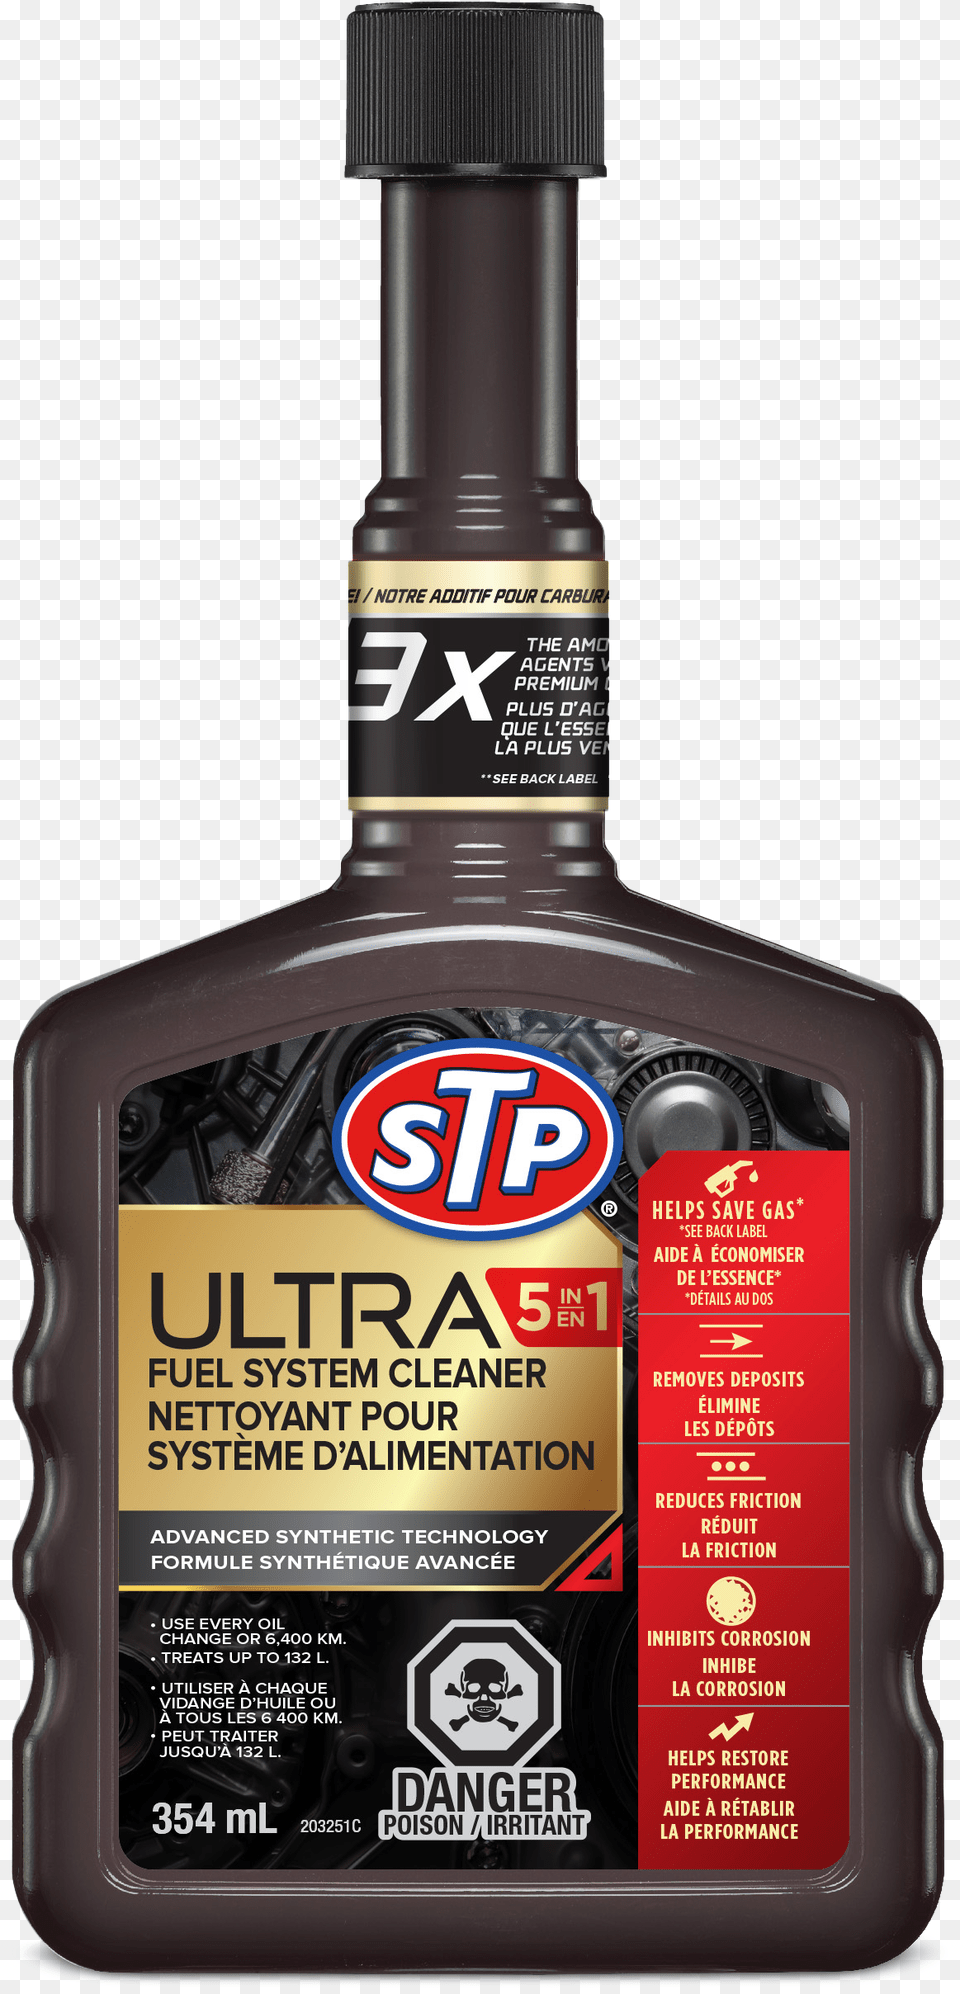 Stp Ultra 5 In 1 Fuel System Cleaner And Fuel Stabilizer, Bottle, Alcohol, Beverage Png